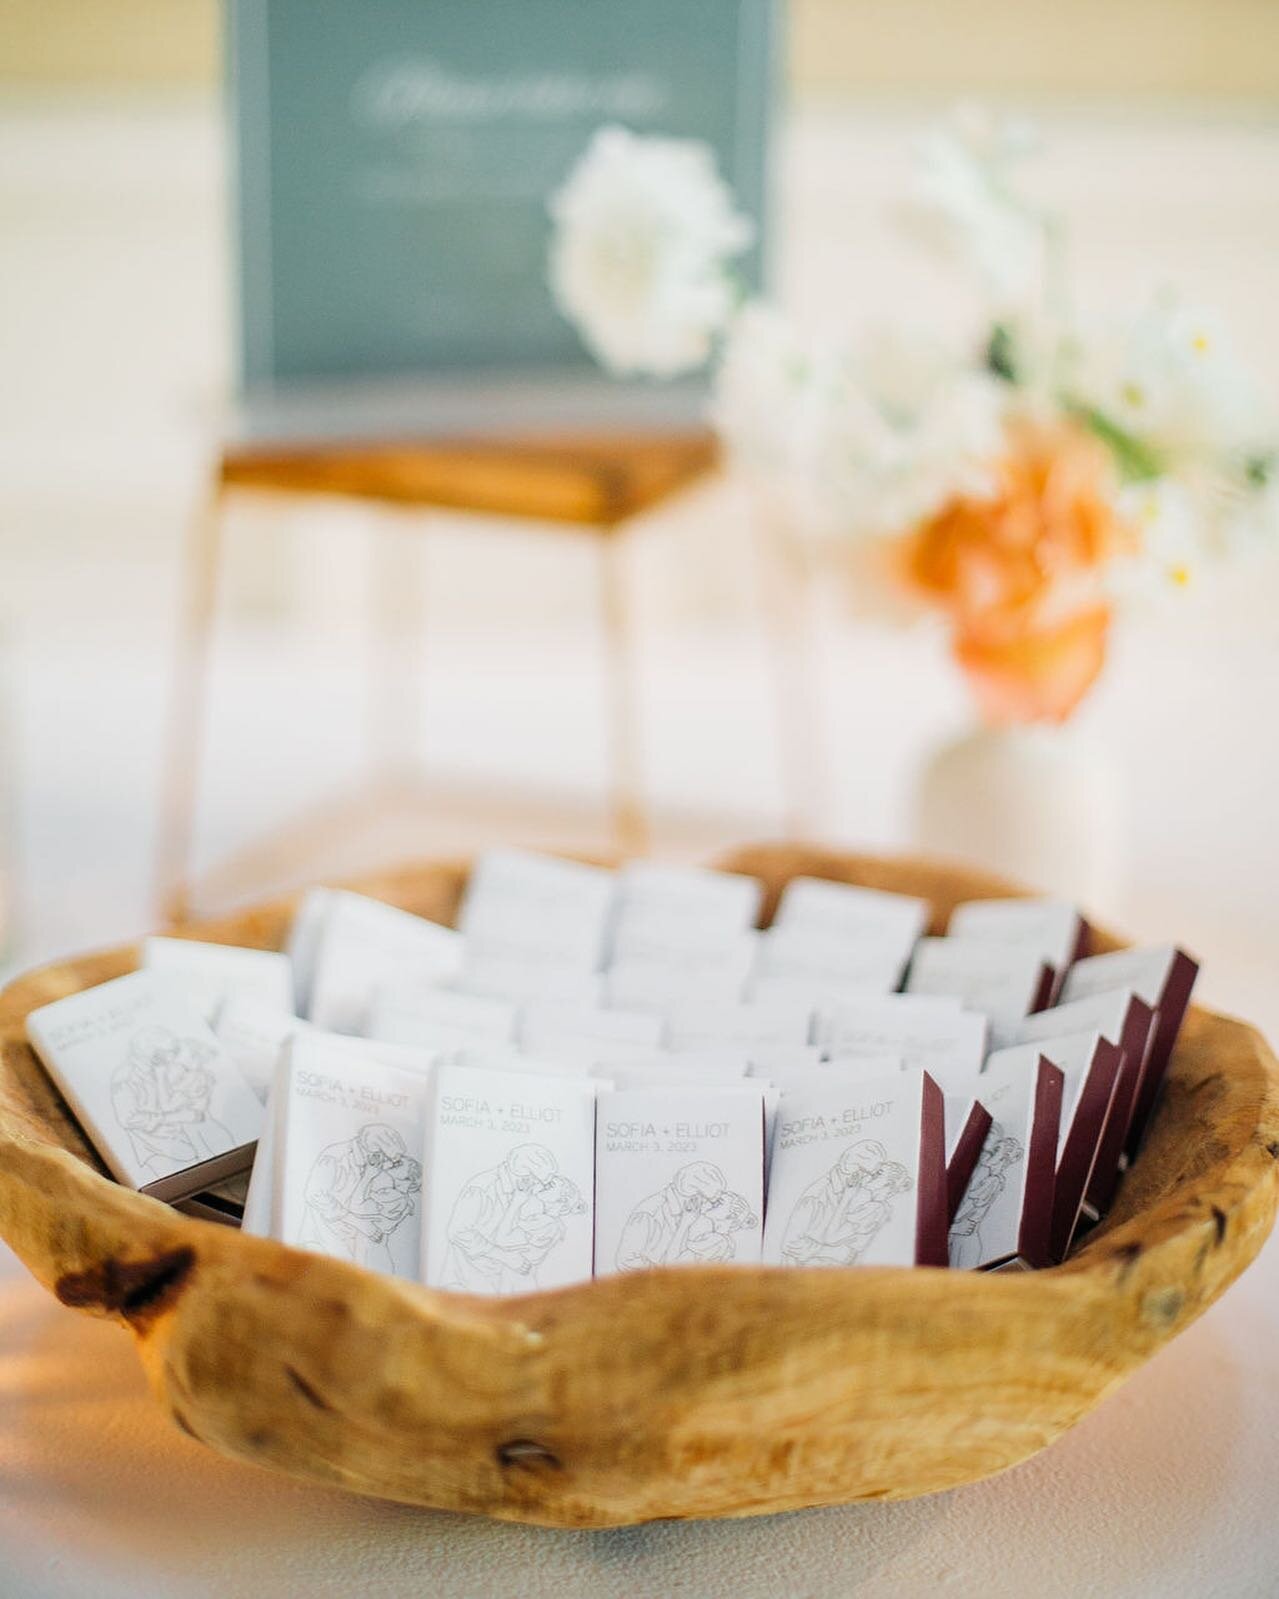 🕯️A unique take home item keeps your guests reminiscing of the spectacular event you had! These custom matchbooks had invitees oohing and ahh-ing all night long! 

📸: @trishaharrisonphotography 

#weddingift #partyfavor #custommatchbook #weddingins